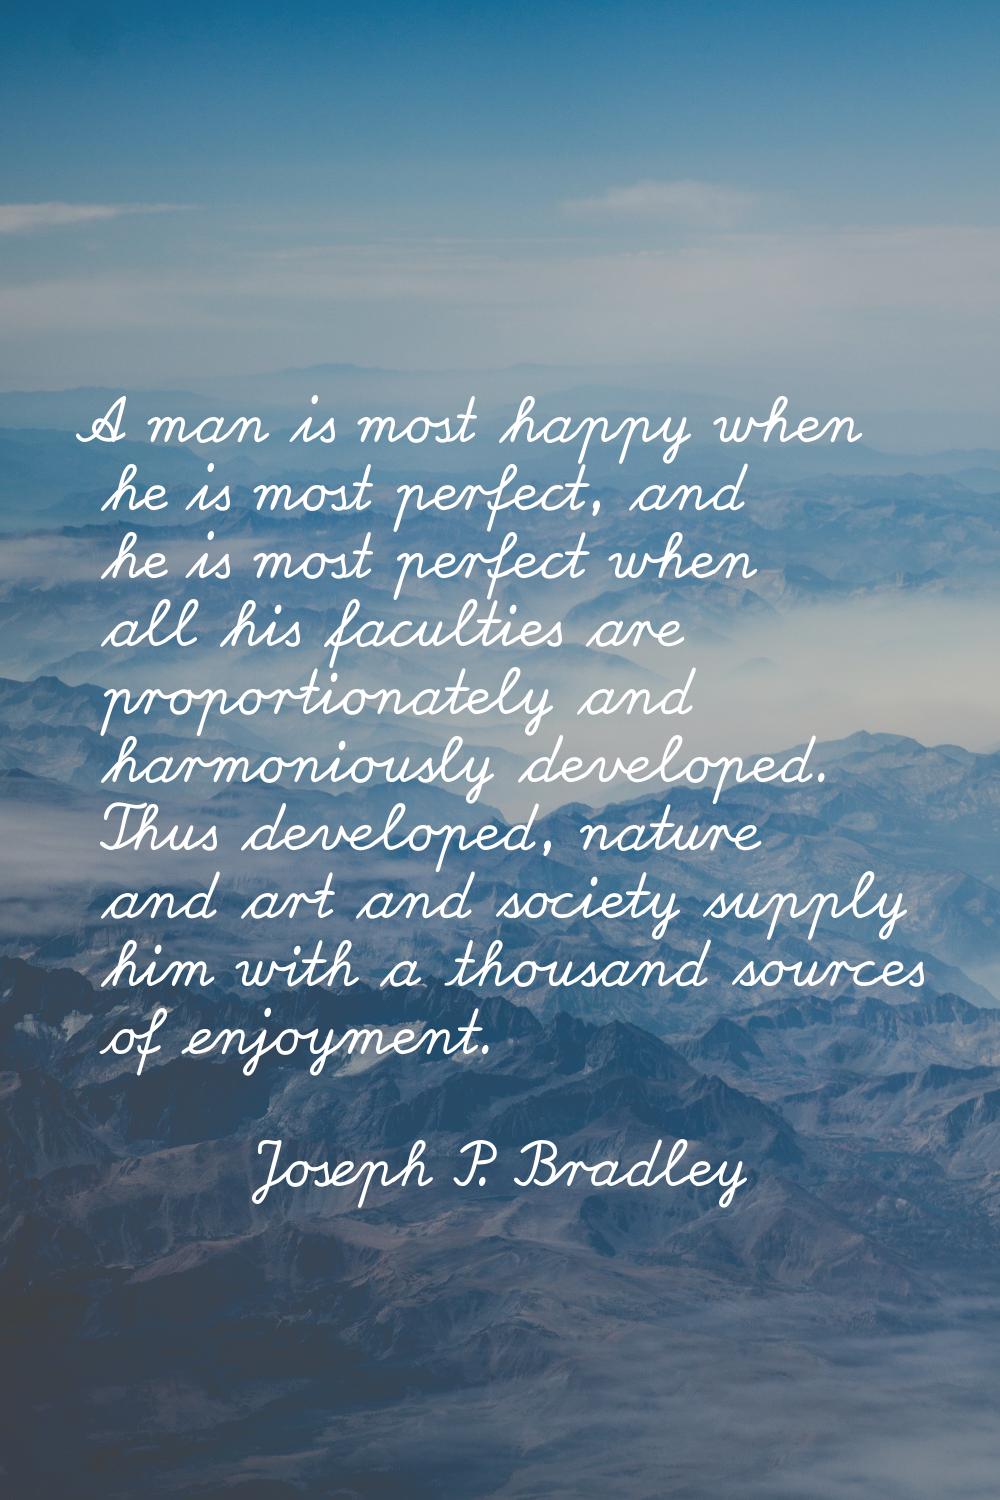 A man is most happy when he is most perfect, and he is most perfect when all his faculties are prop